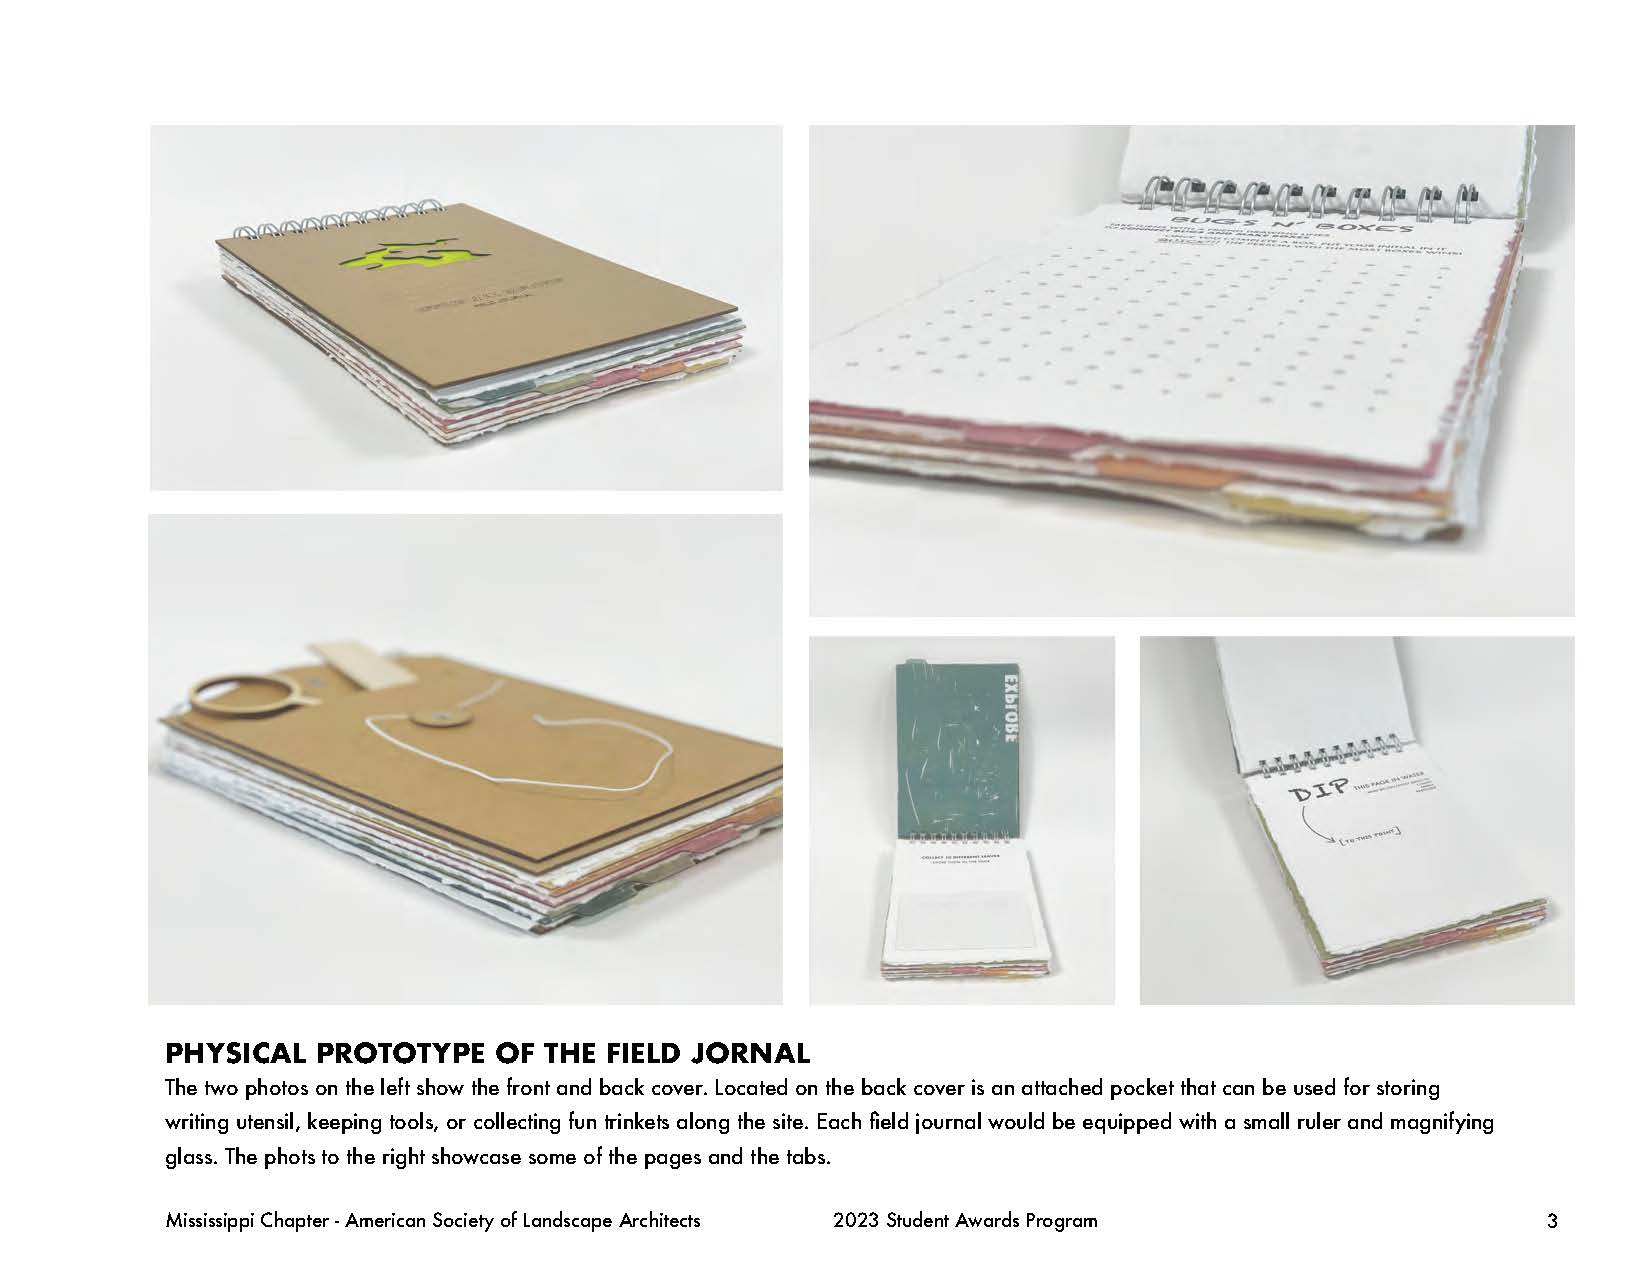 Physical Prototype of the Field Journal